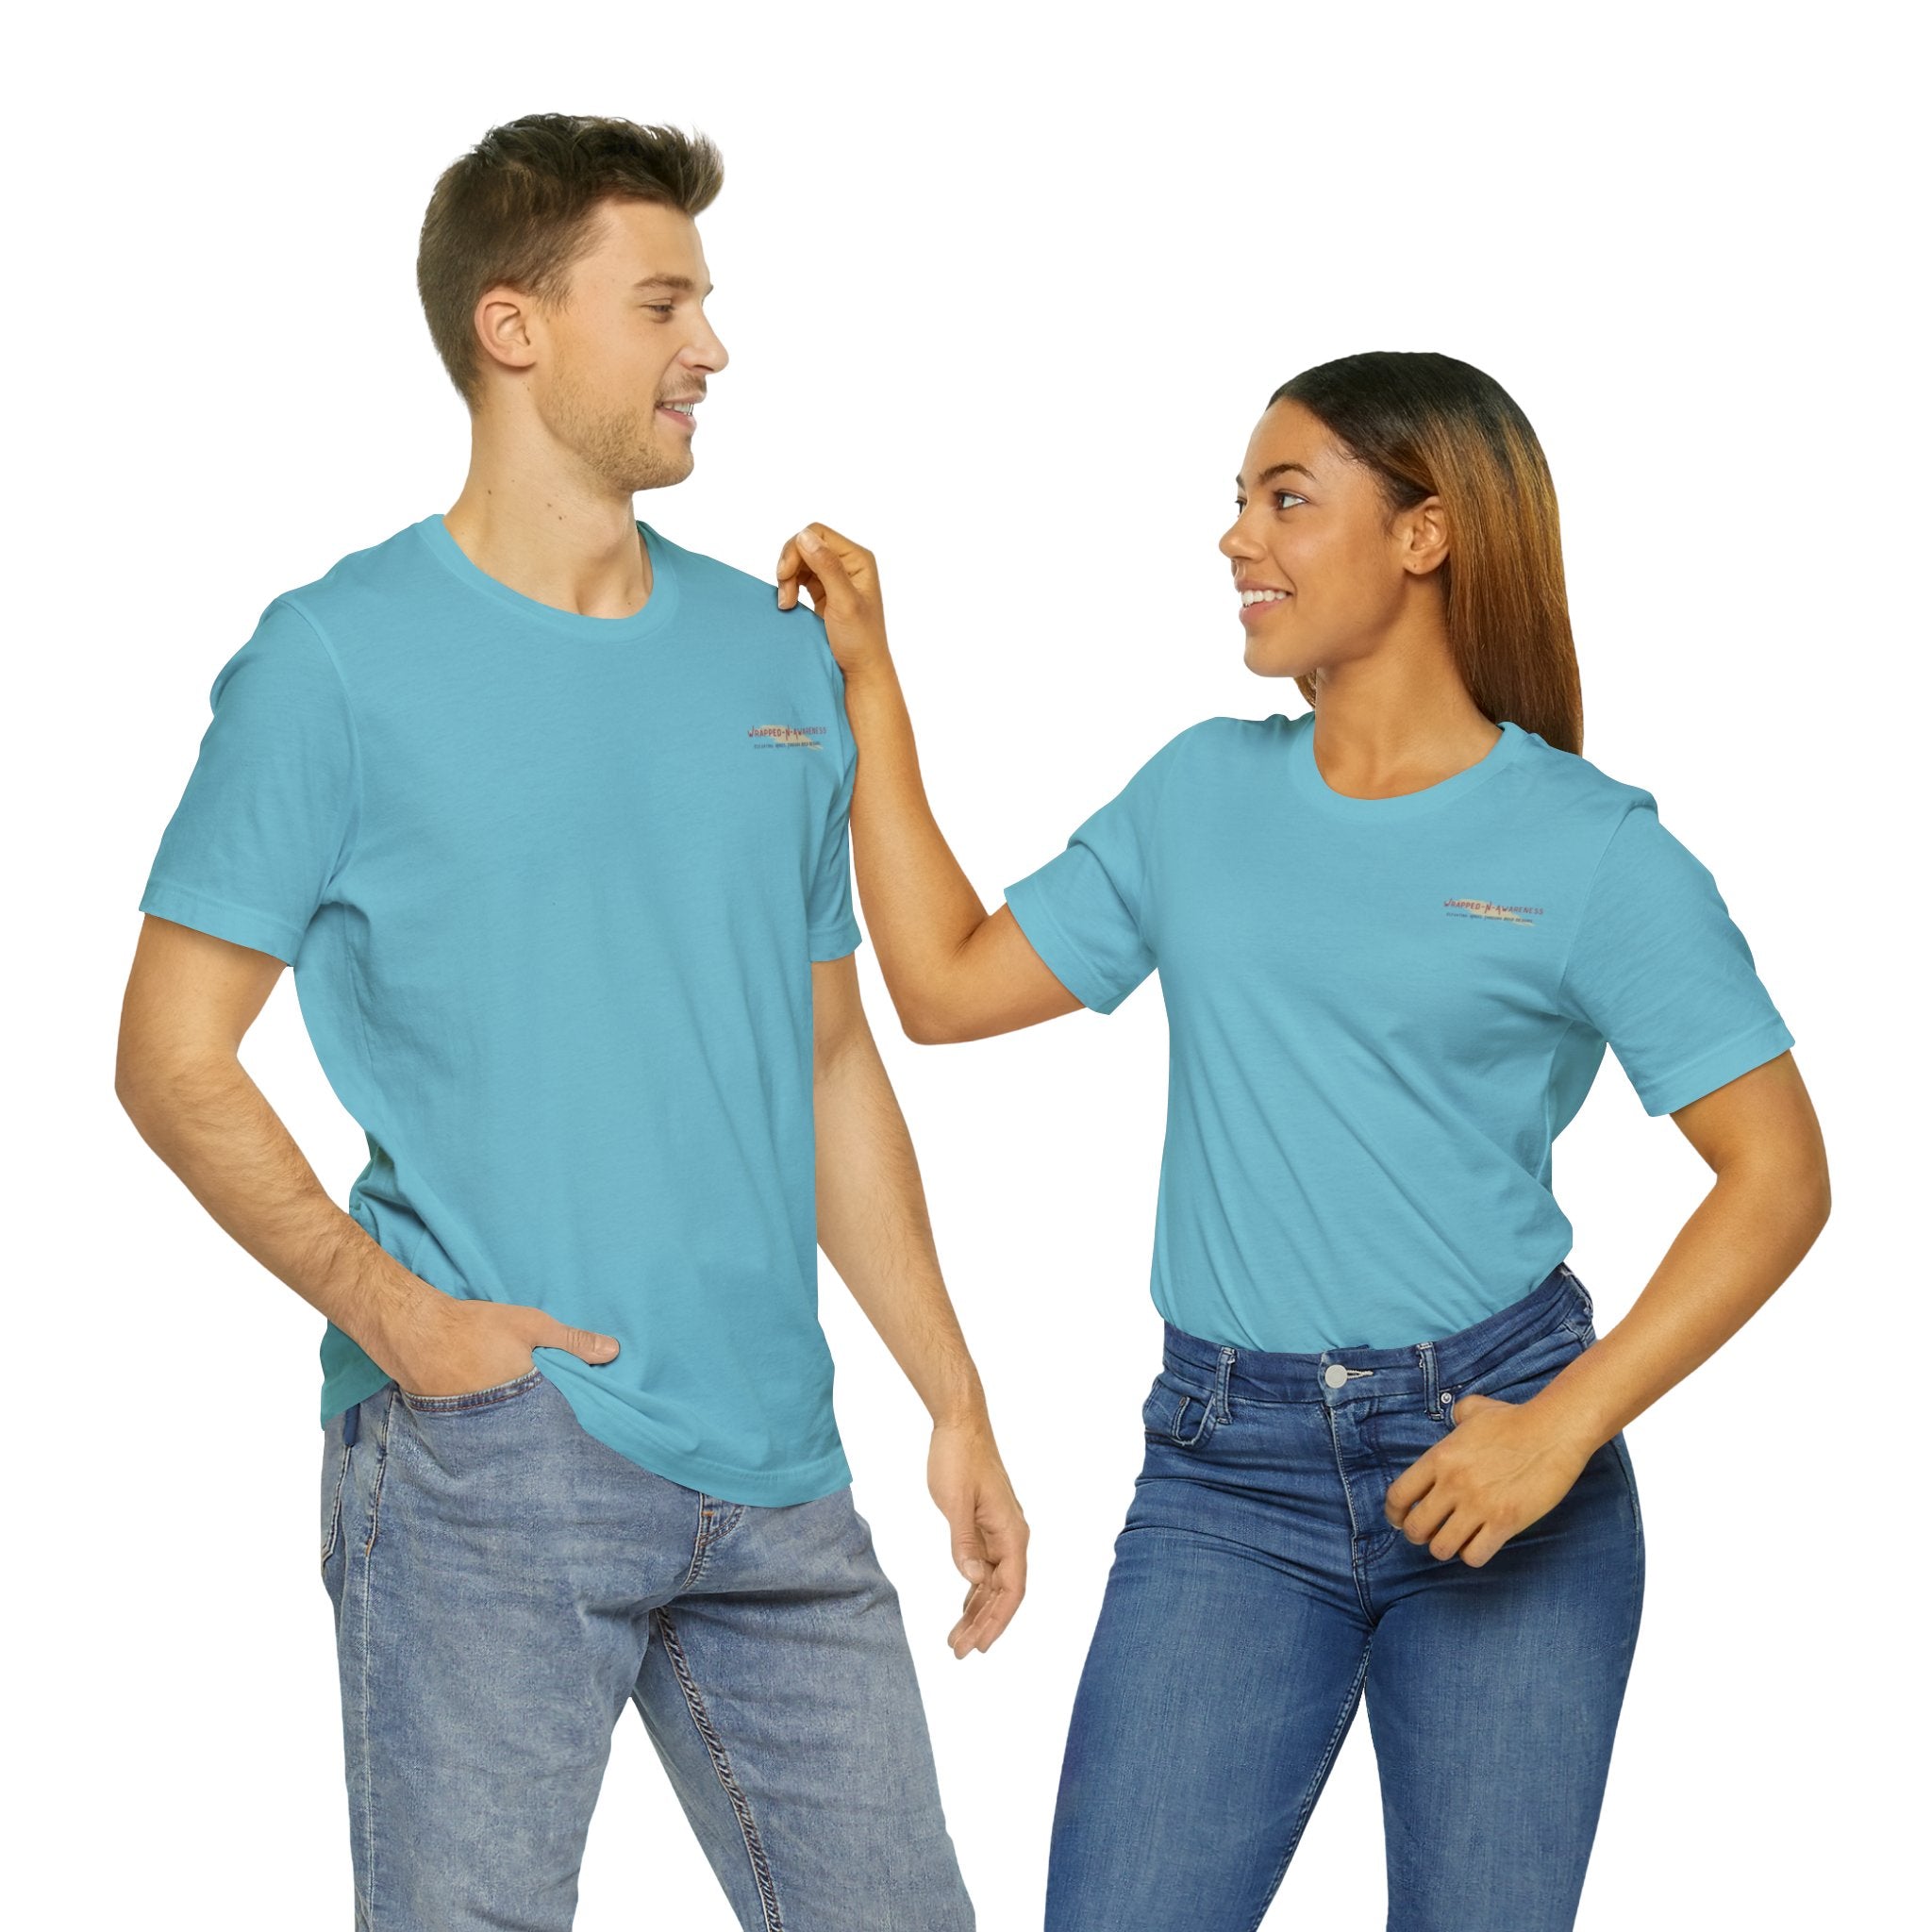 Mindfulness Heals Wounds Tee - Bella+Canvas 3001 Turquoise Airlume Cotton Bella+Canvas 3001 Crew Neckline Jersey Short Sleeve Lightweight Fabric Mental Health Support Retail Fit Tear-away Label Tee Unisex Tee T-Shirt 18002876130549031812_2048 Printify